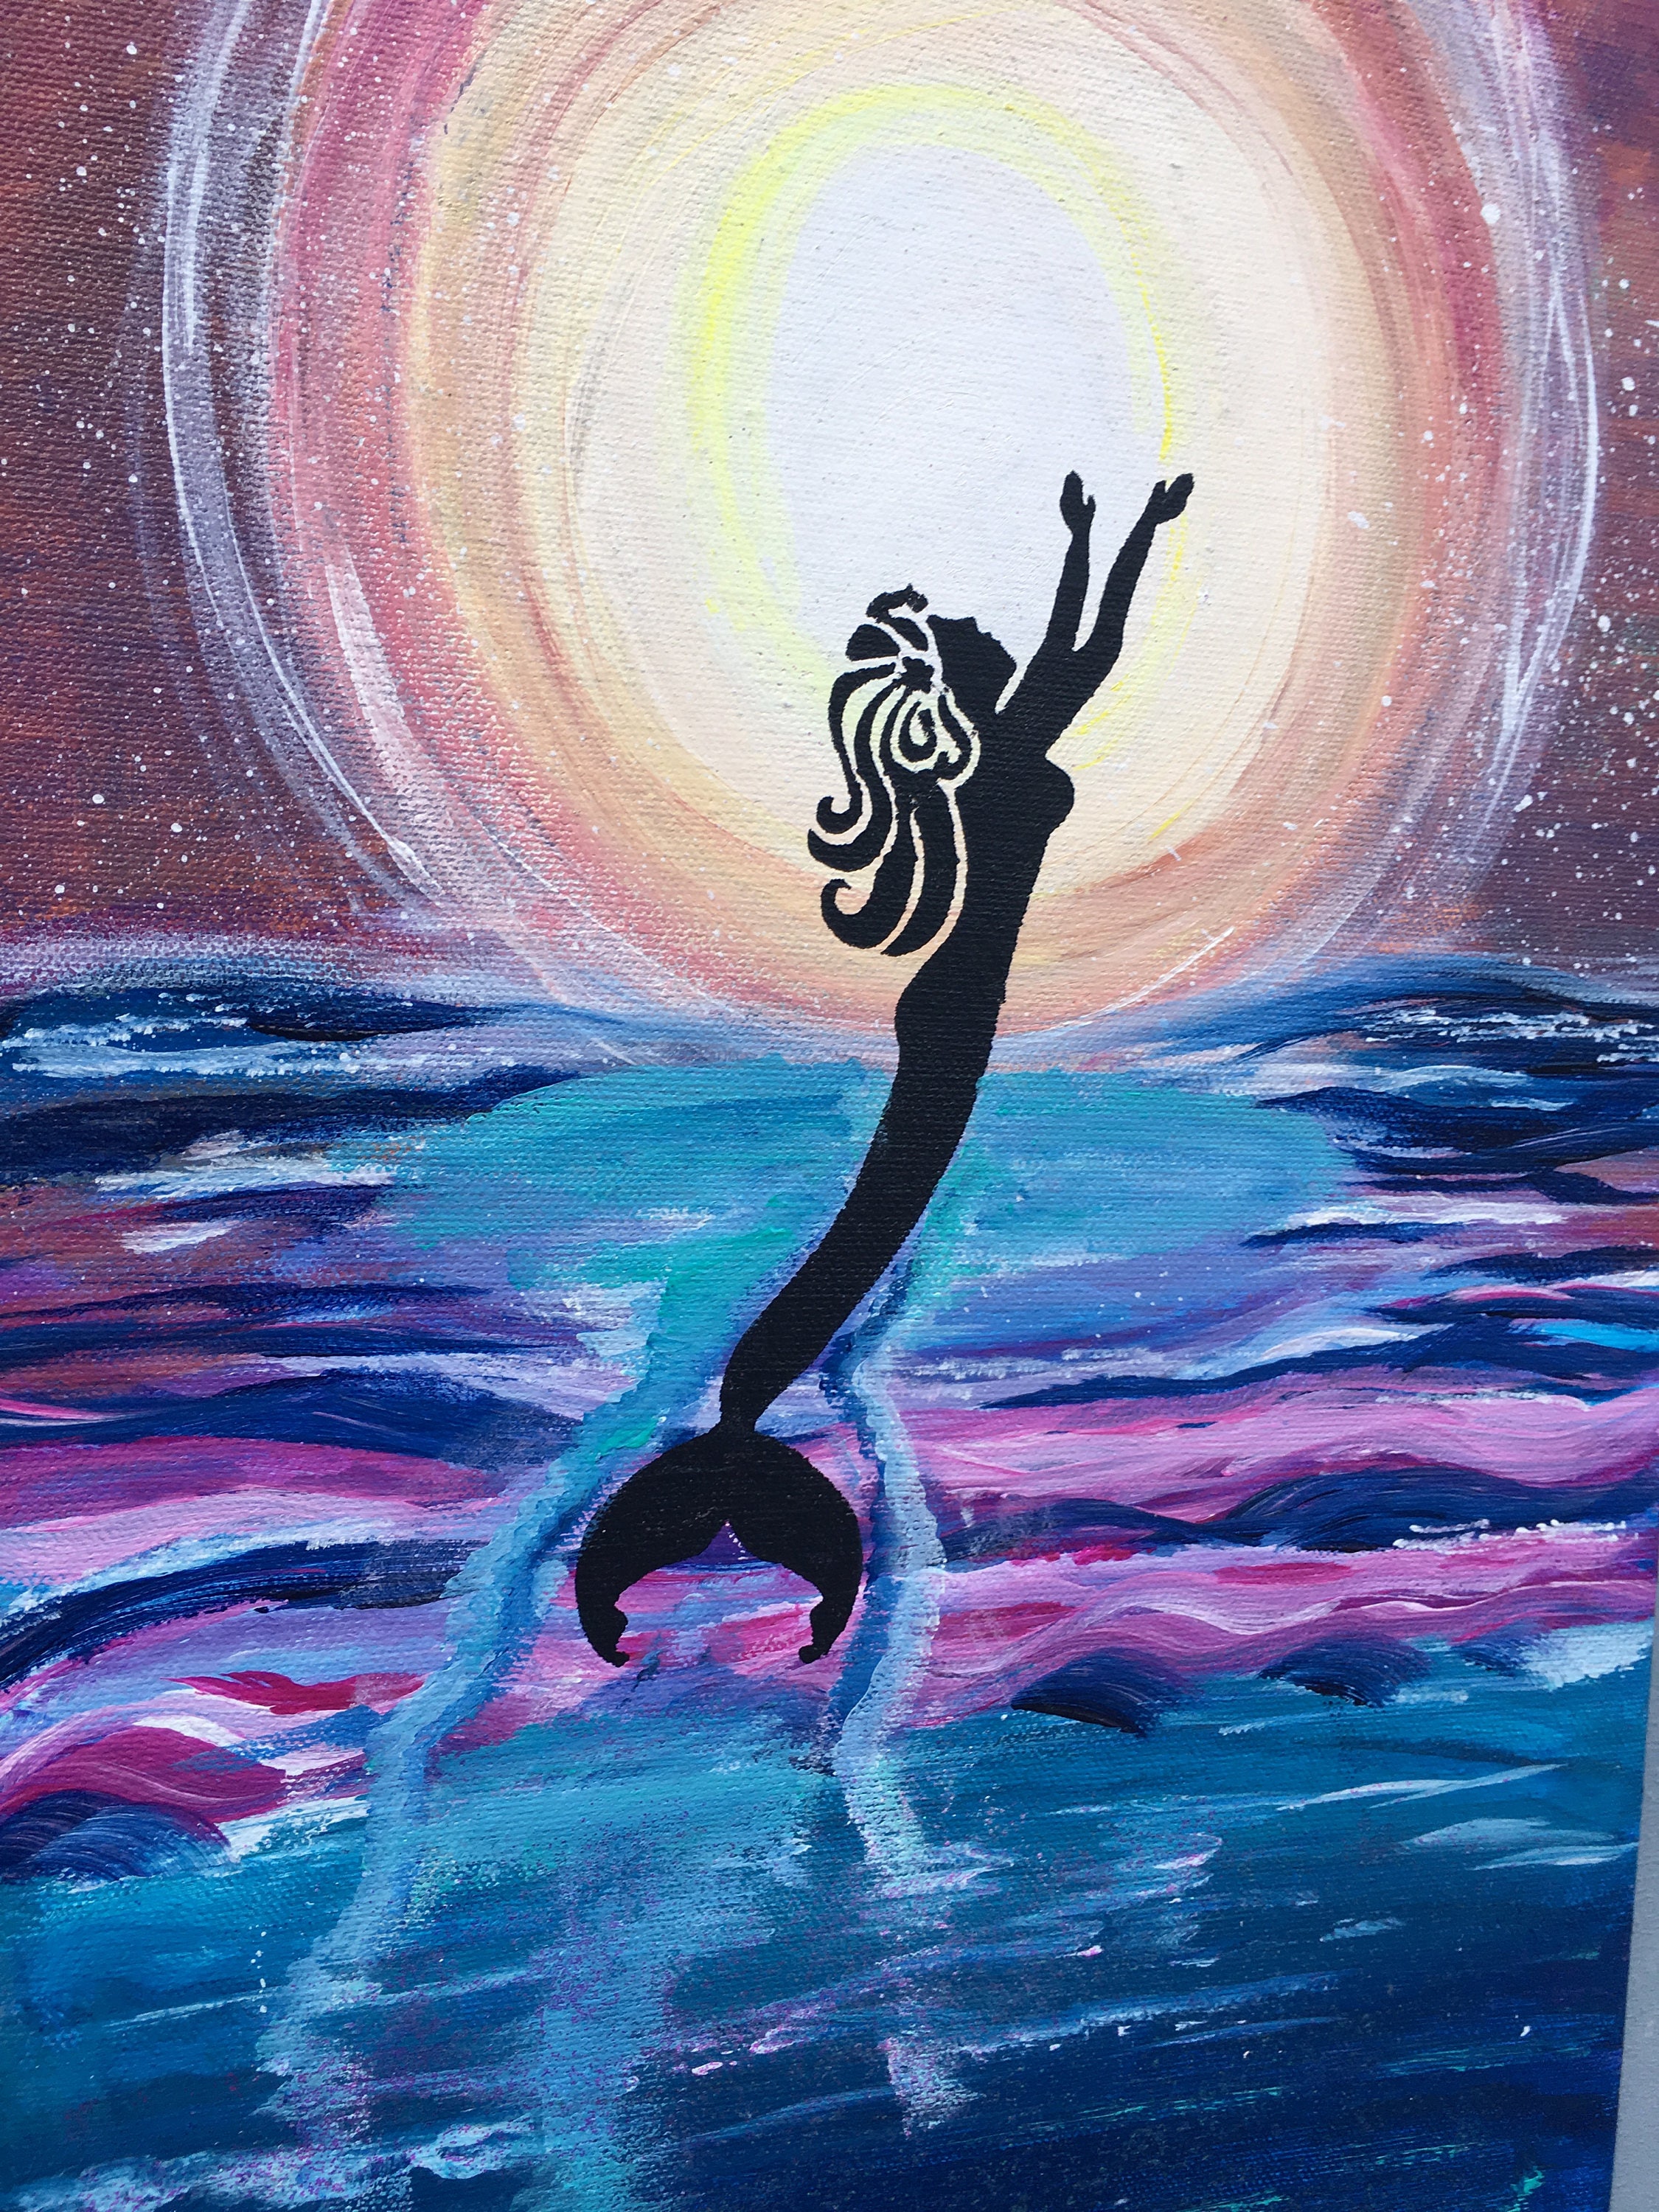  Mermaid  Painting  Hand Painted Acrylic  Original Painting  by